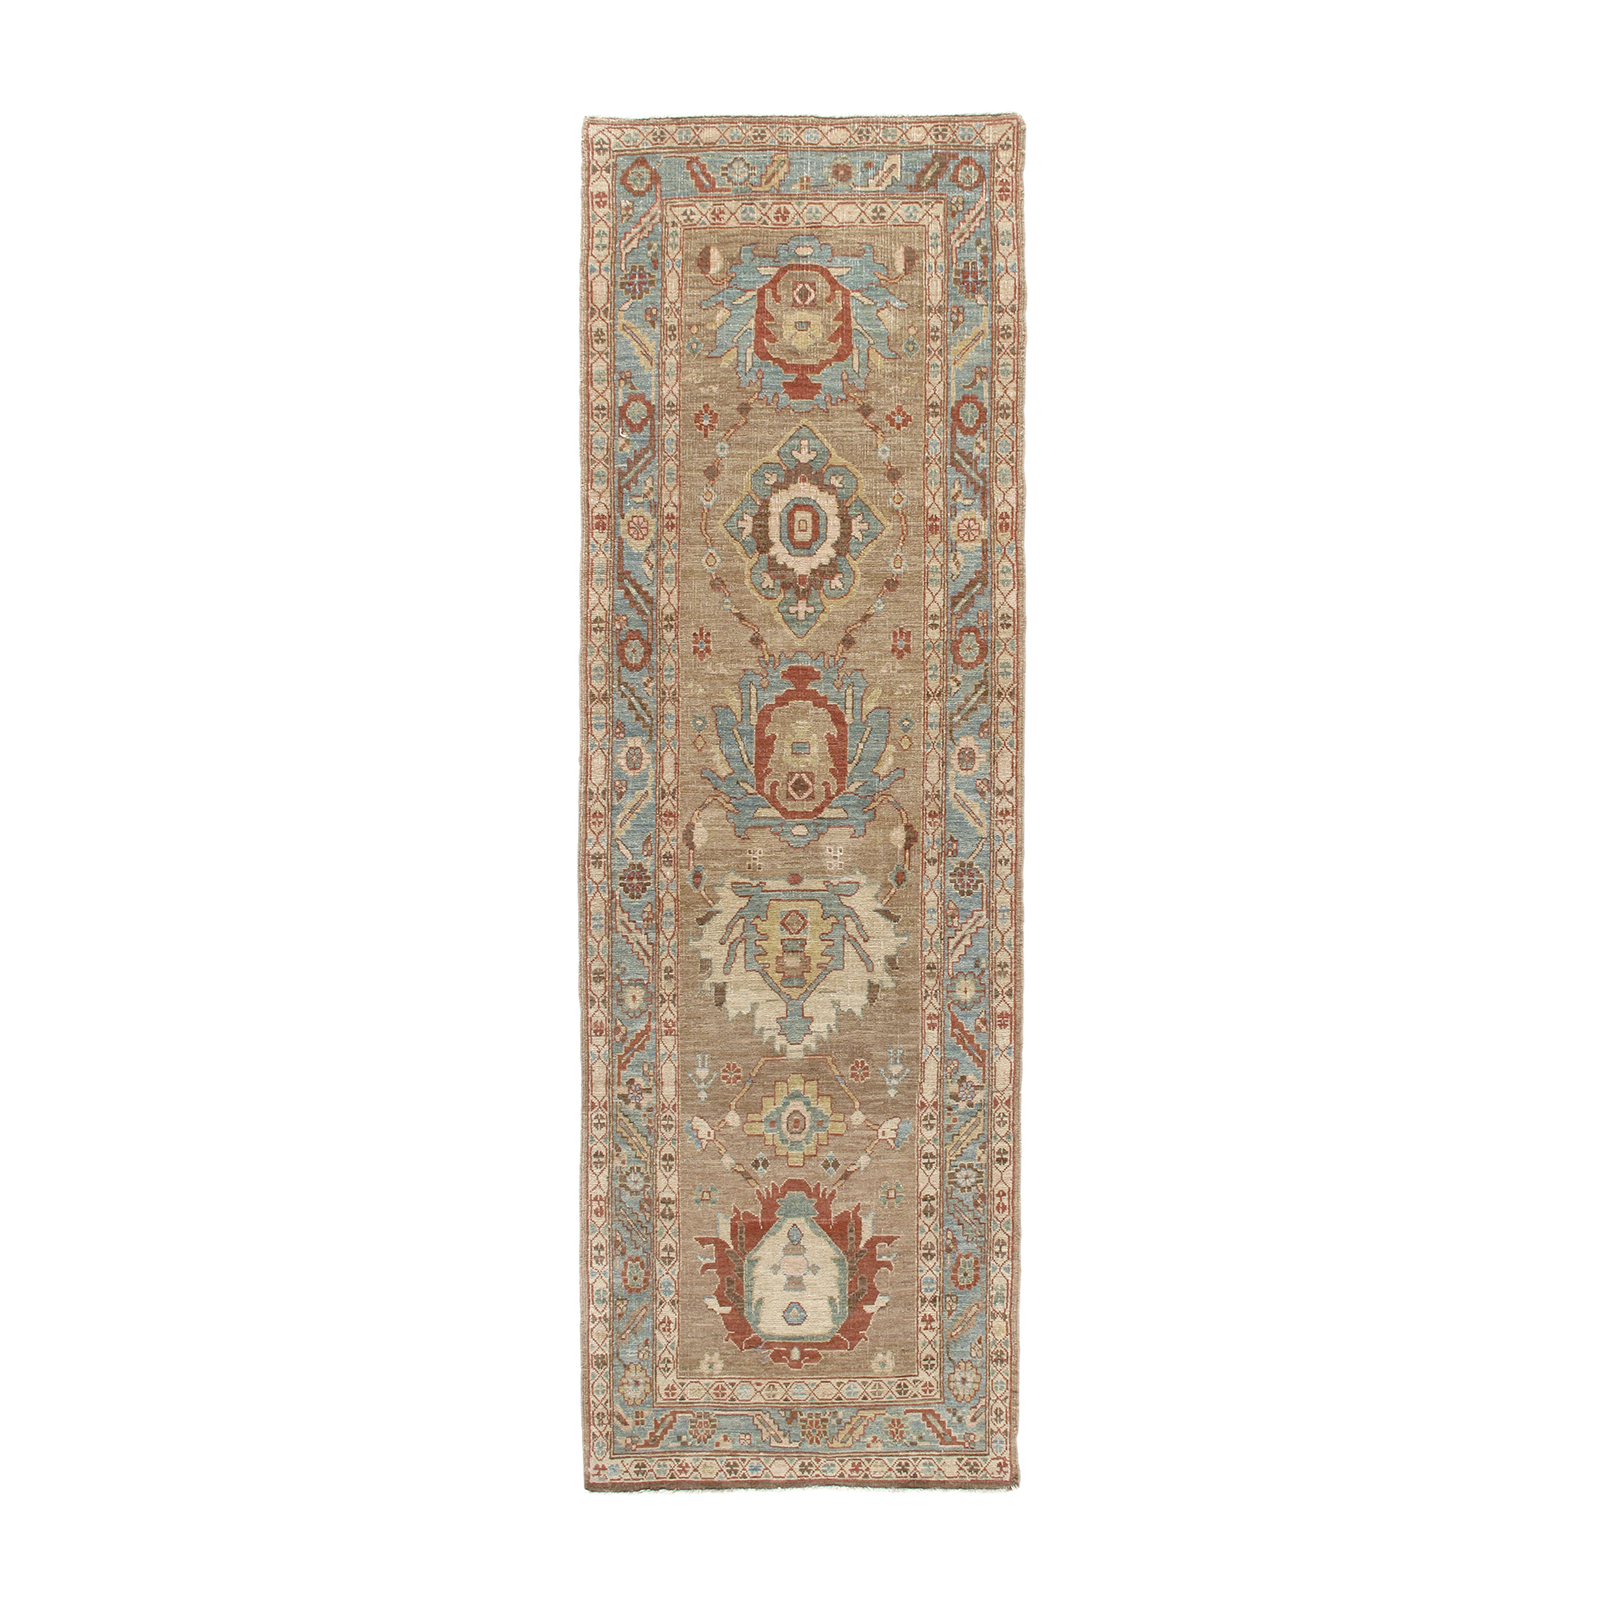 This Bakshaish Runner is hand-knotted  band made of hand-spun wool.